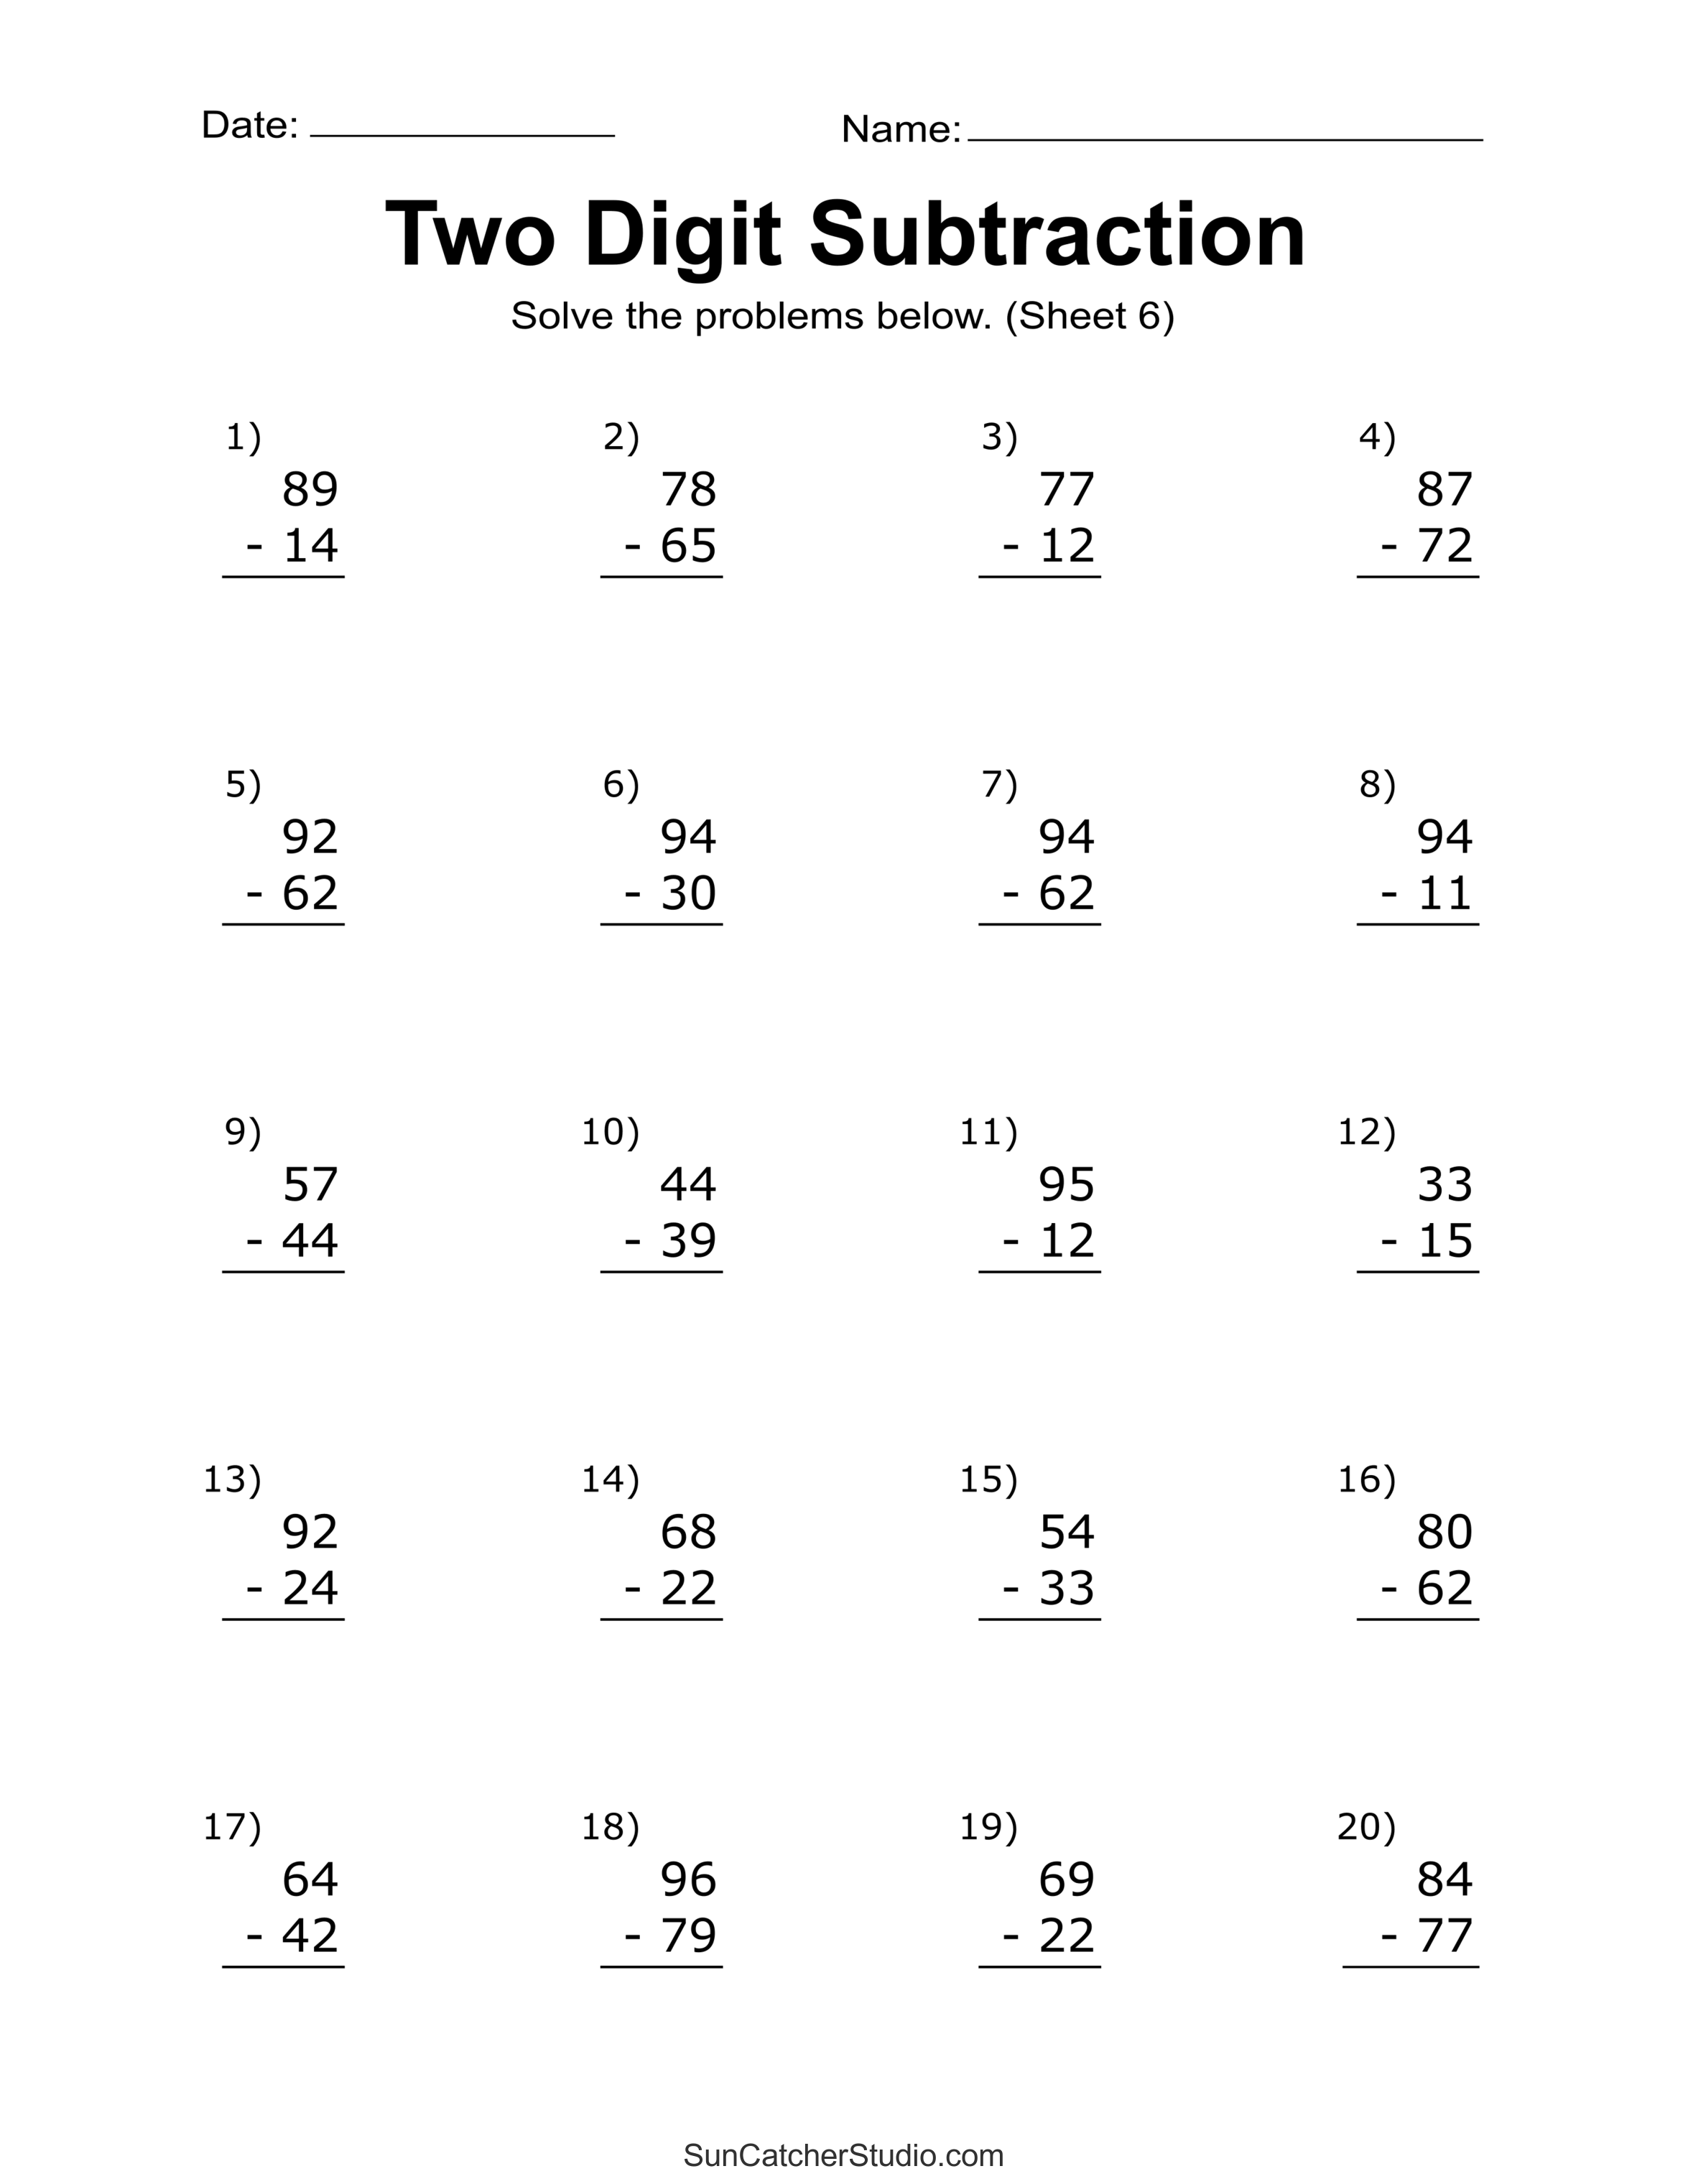 Two Digit Subtraction Worksheets Printable Math Drills DIY Projects Patterns Monograms